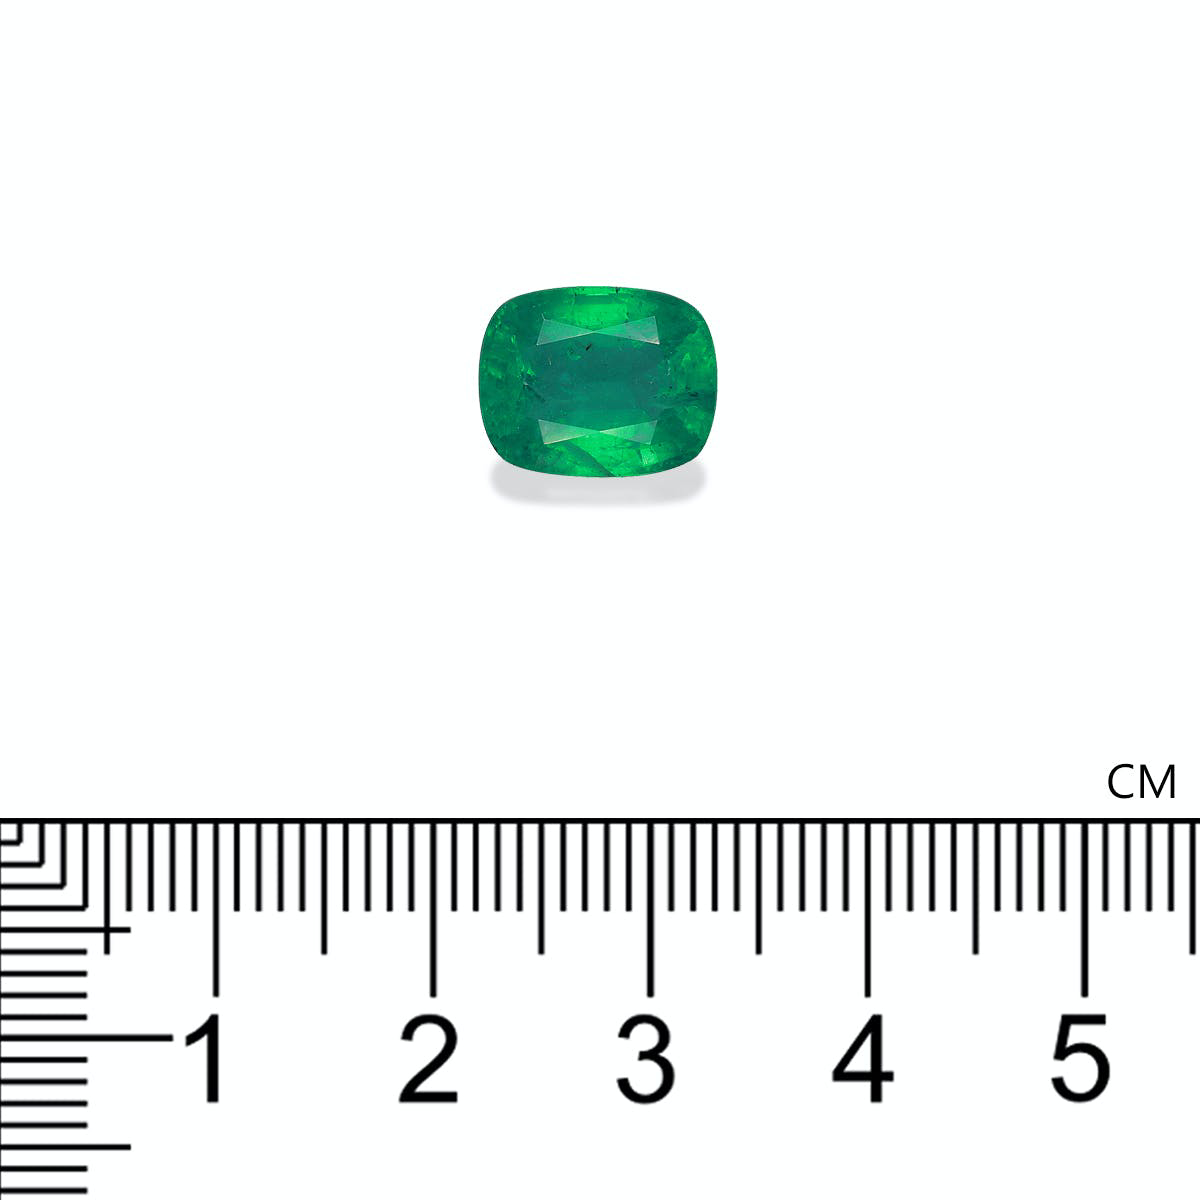 Picture of Green Zambian Emerald 3.97ct (PG0043)